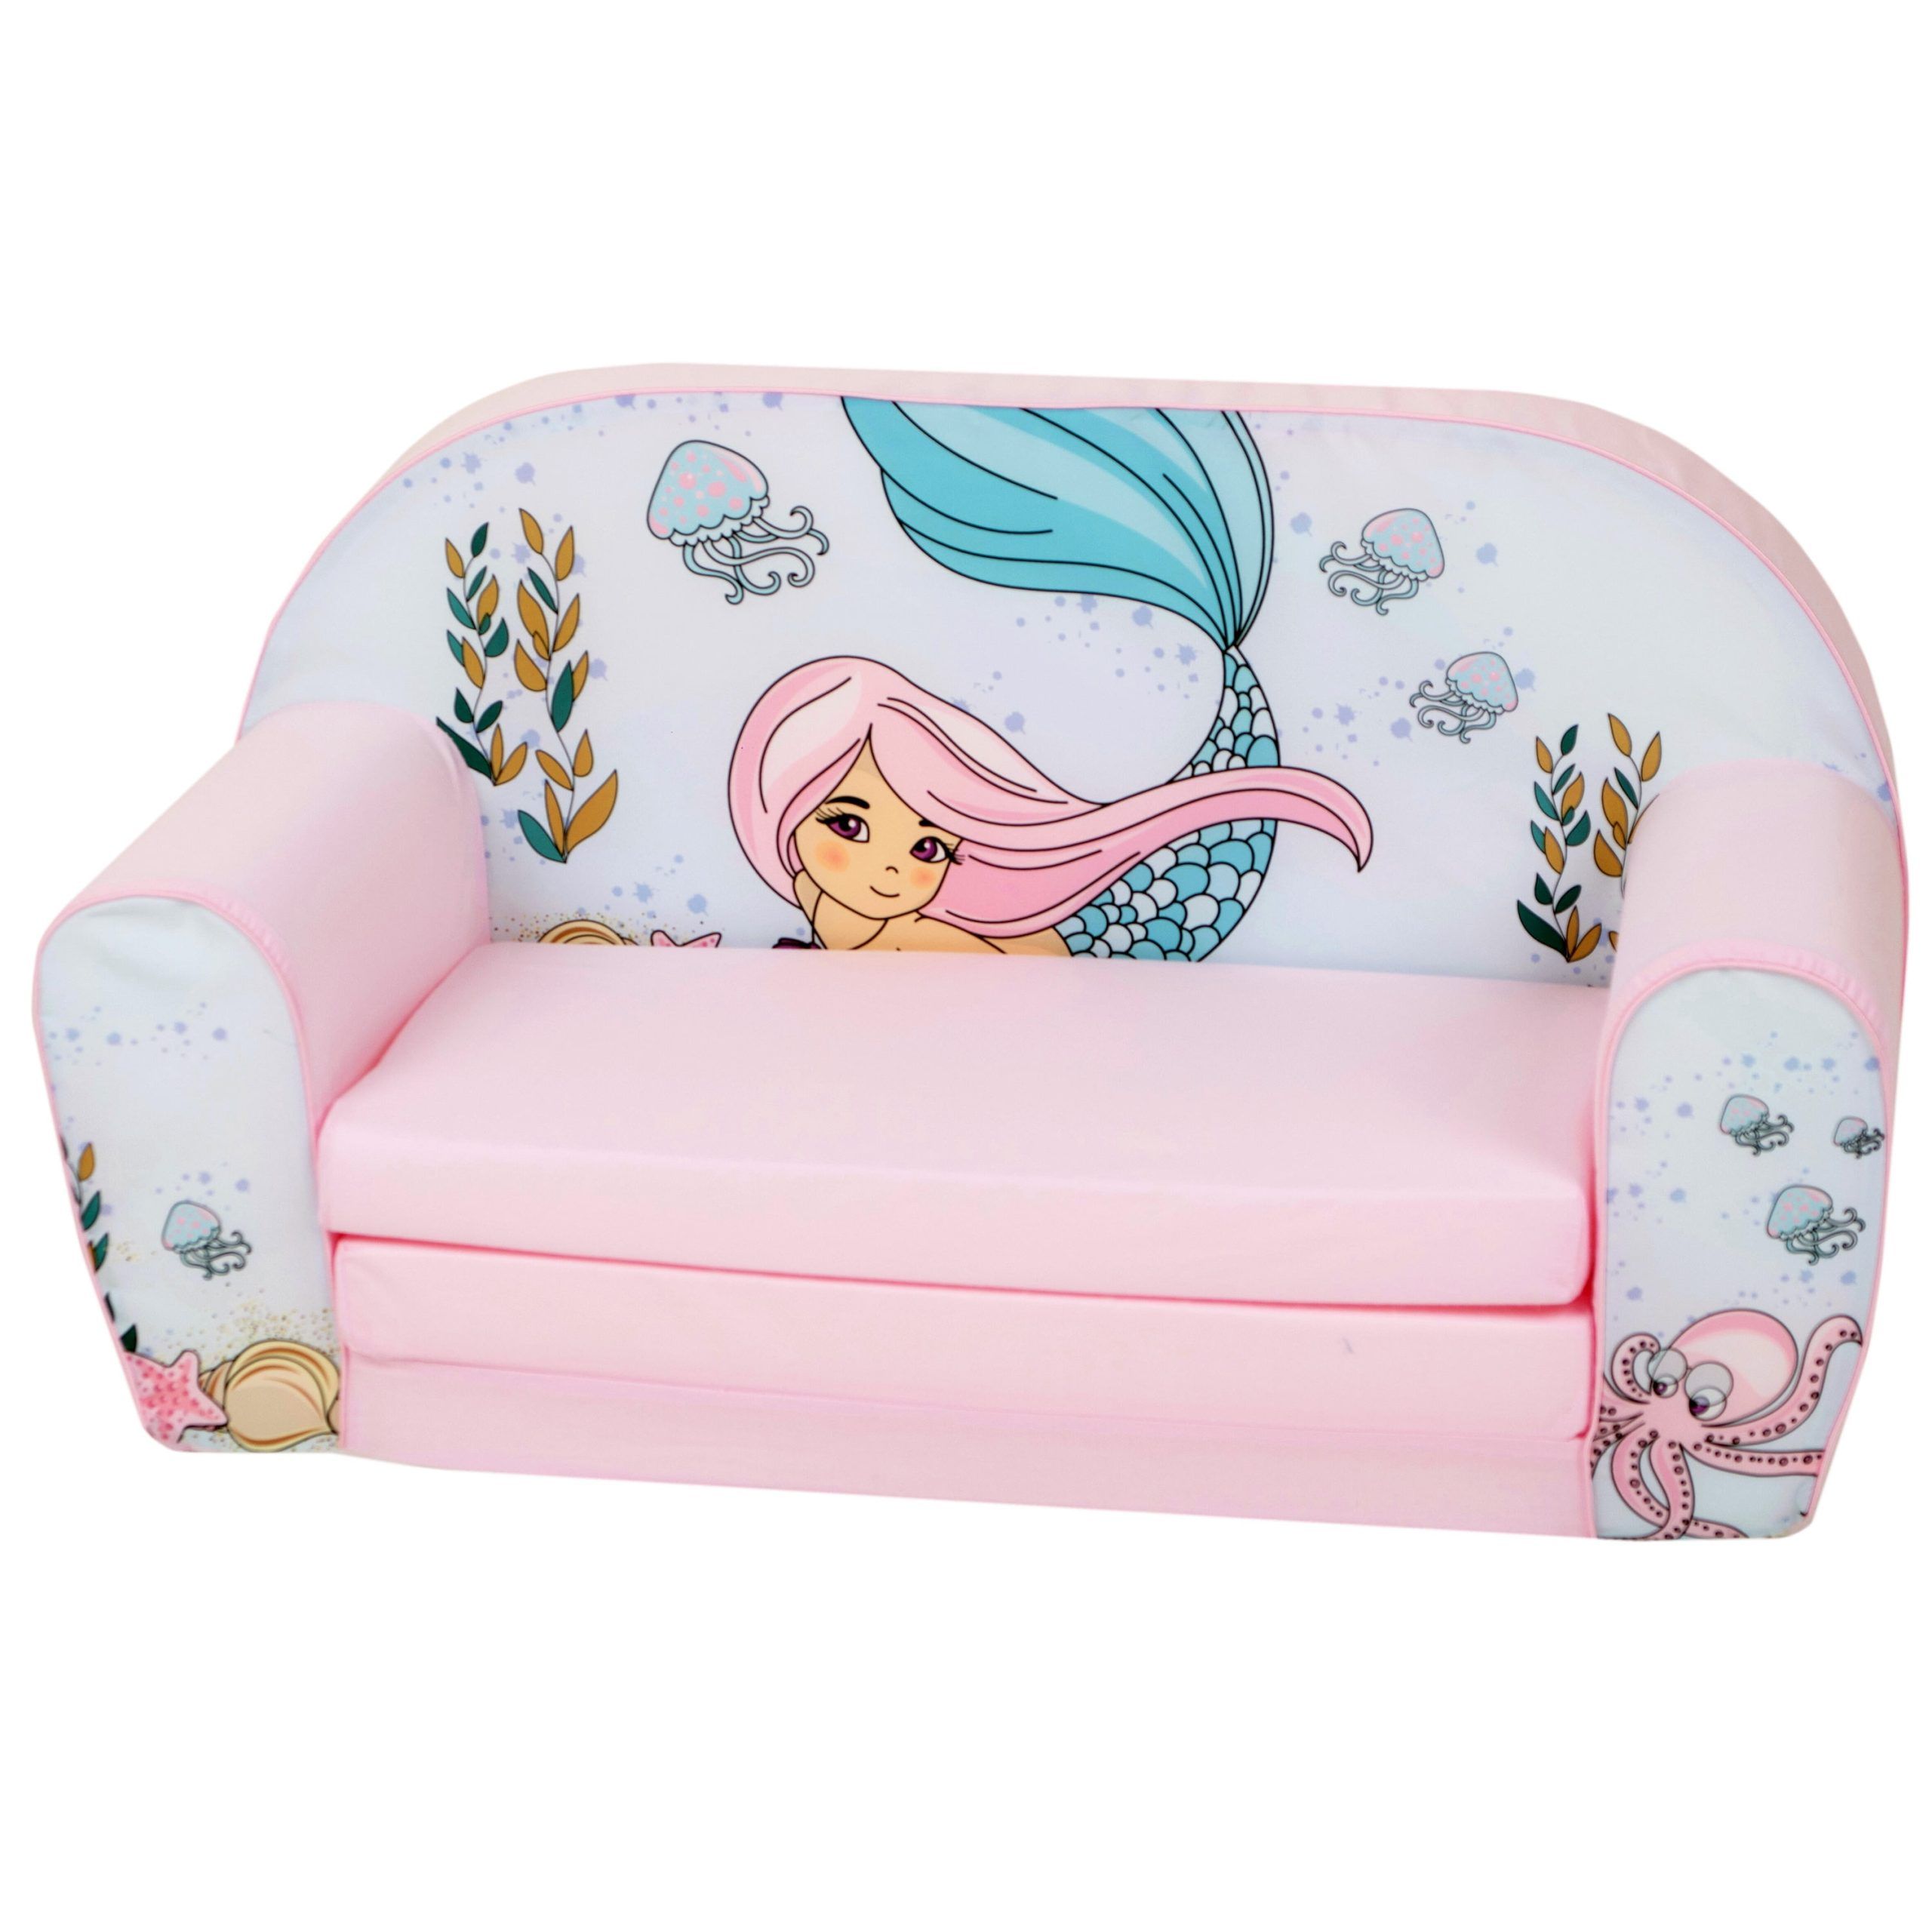 Delsit Toddler Couch & Kids Sofa – European Made Children's 2 In 1 Flip Within Children's Sofa Beds (Gallery 12 of 20)